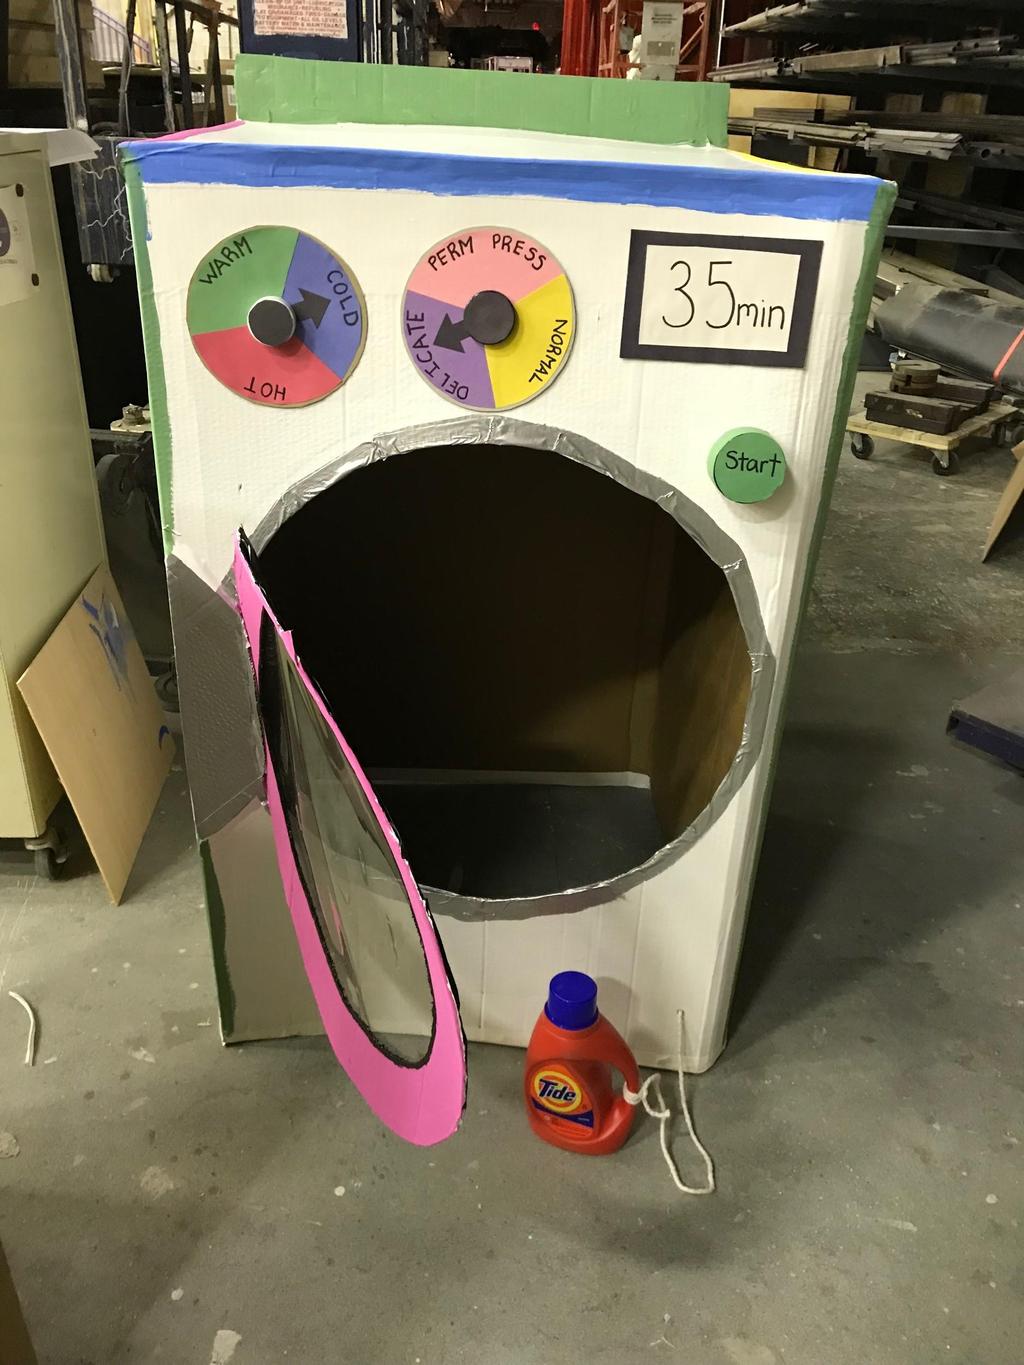 or play with a pretend washing machine in the